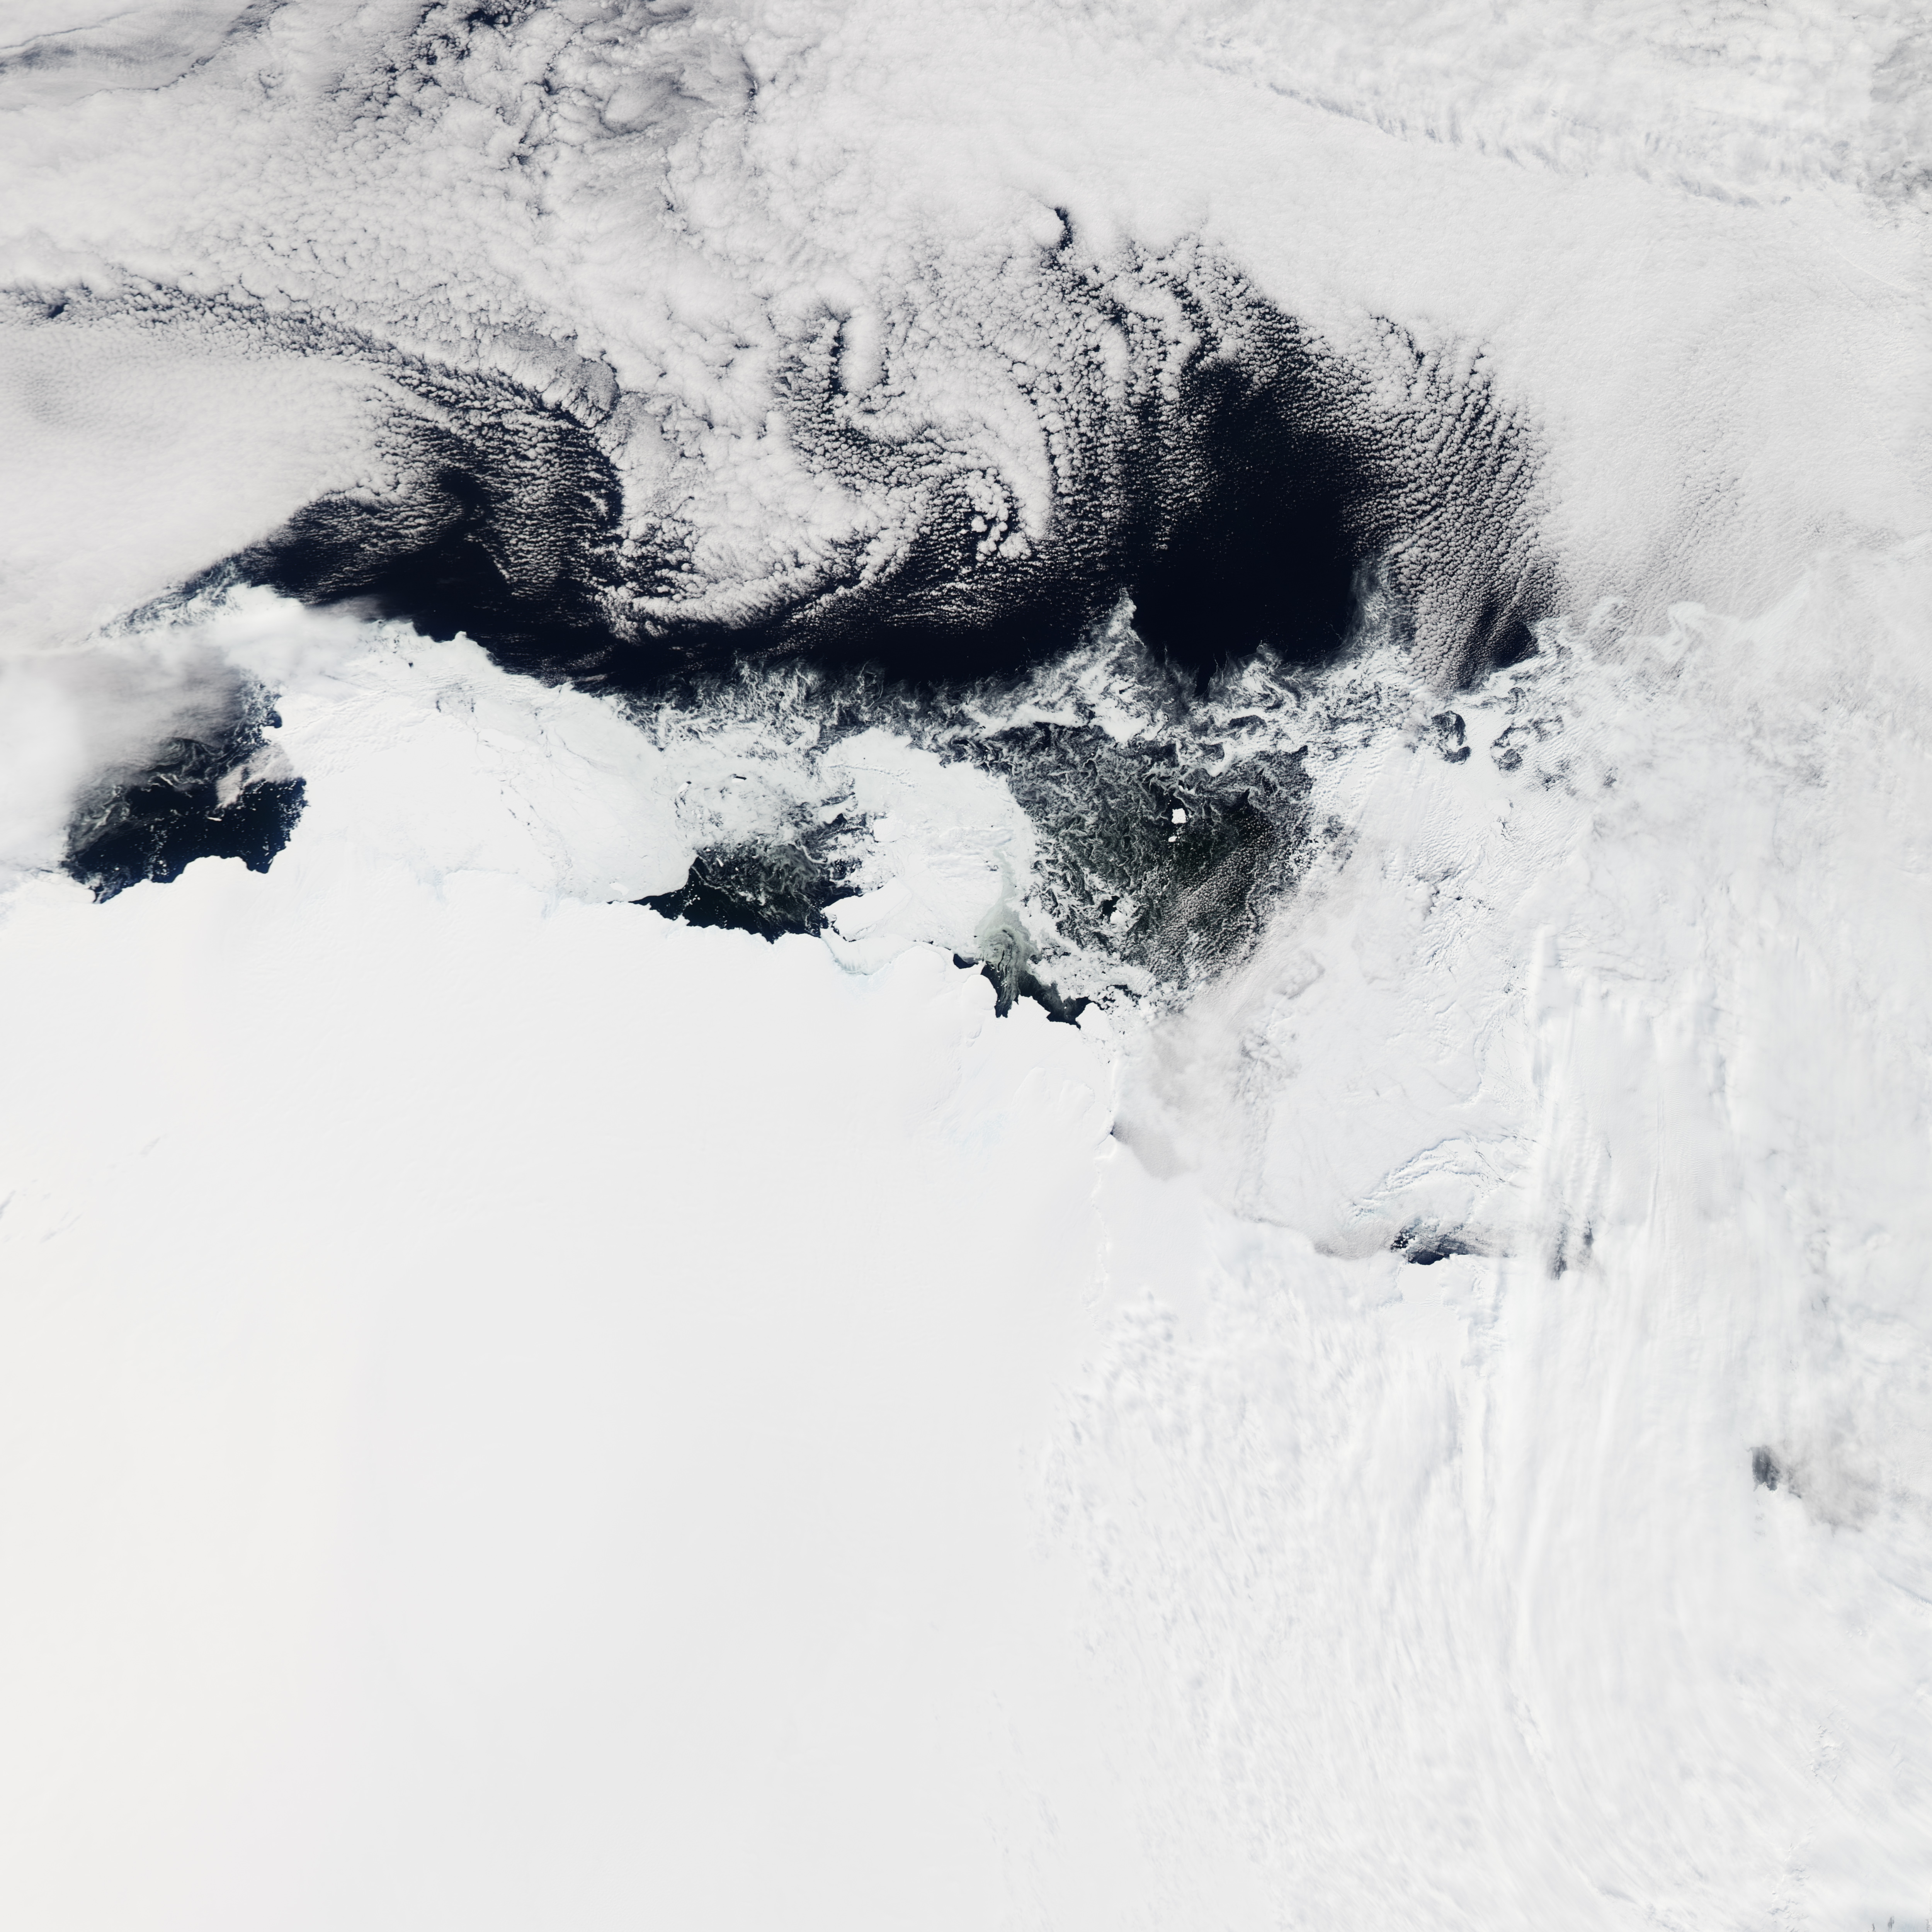 Antarctic Berg Shifts, Sea Ice Responds  - related image preview